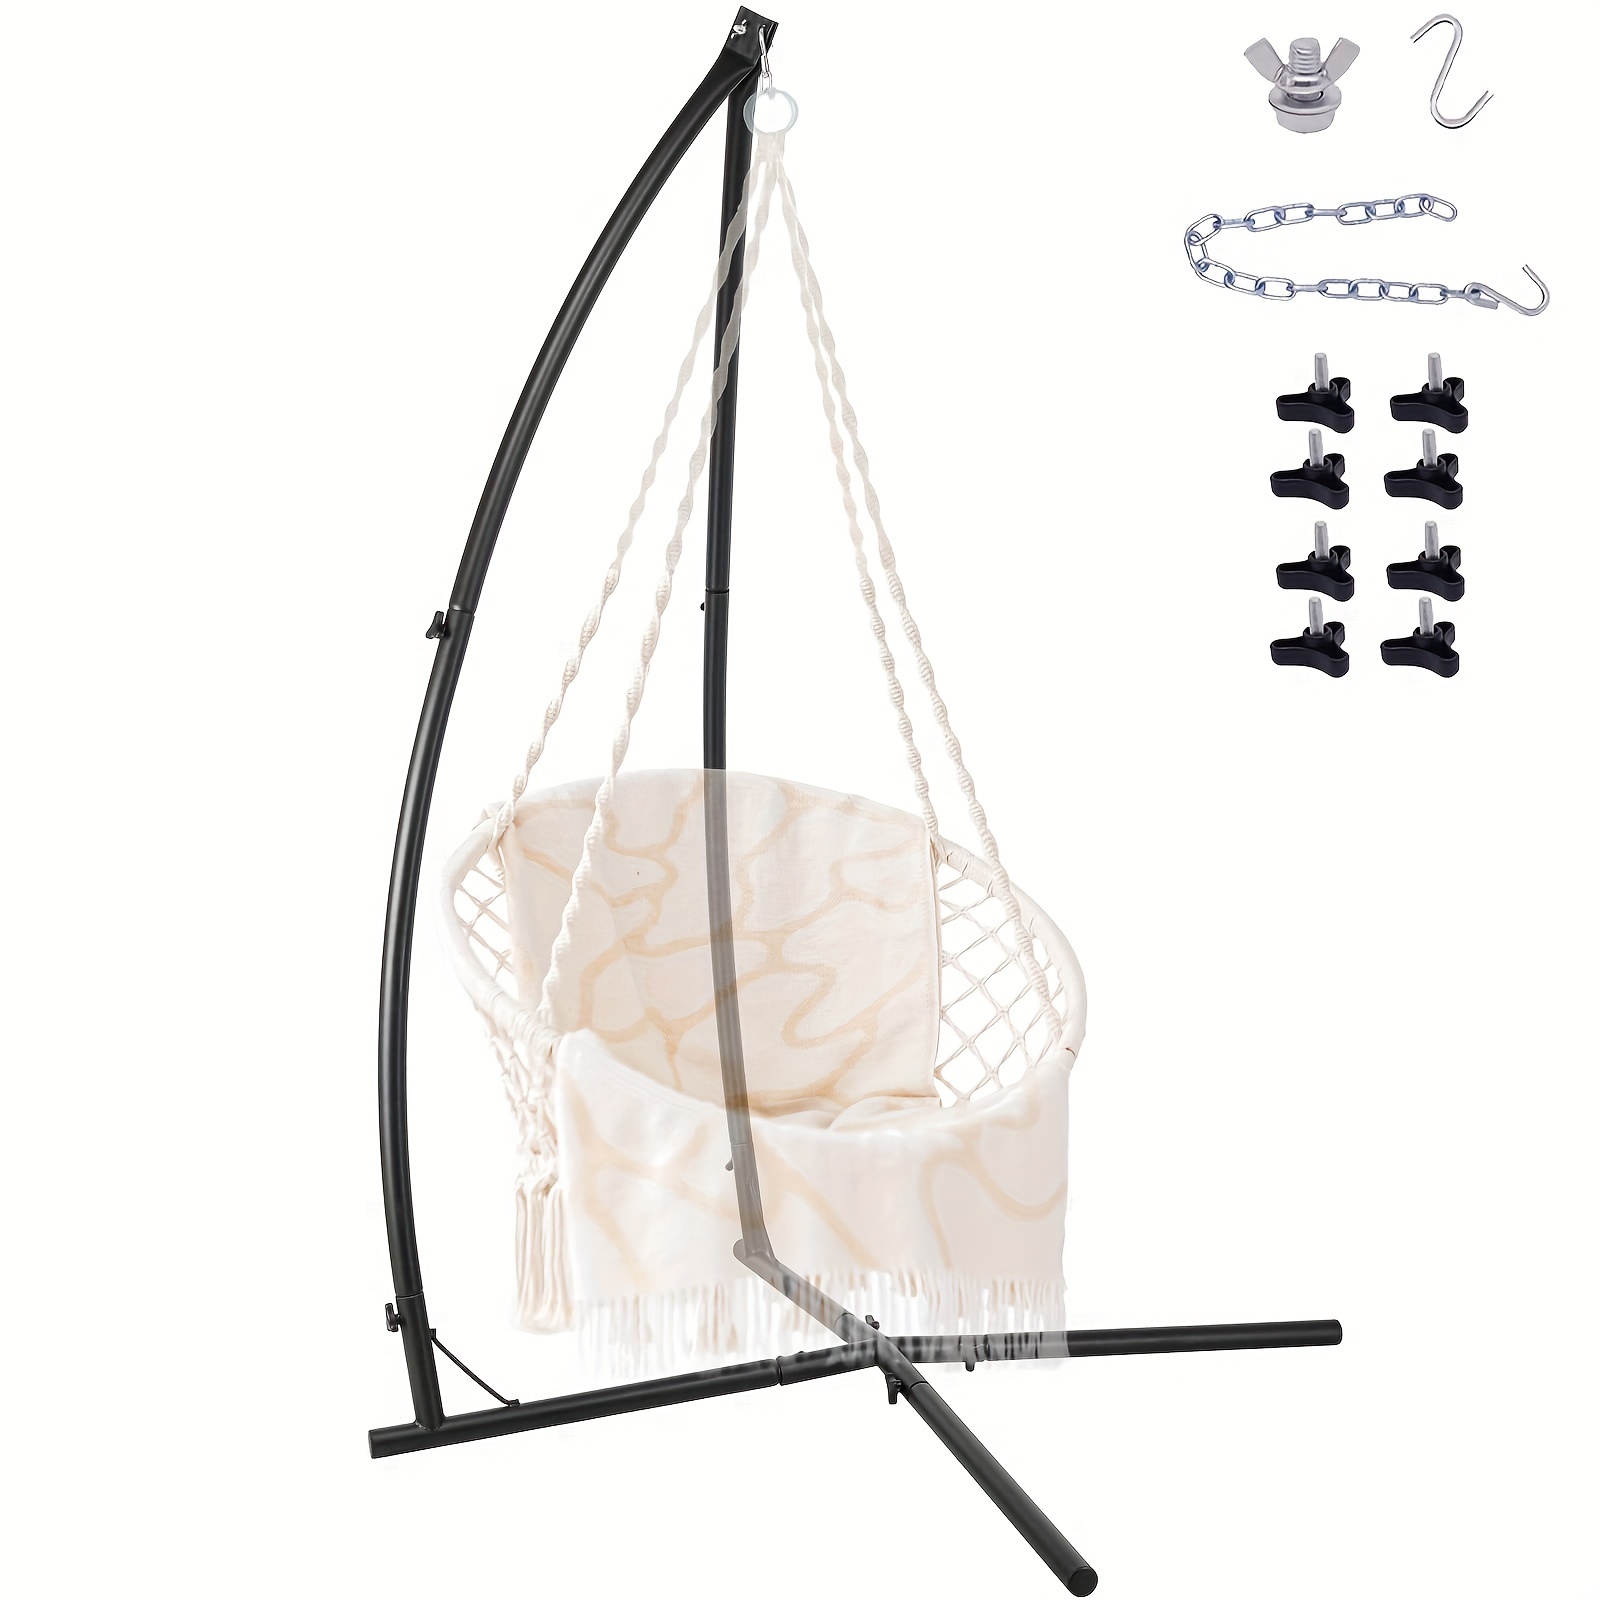 

Hammock Swing Stand, Hanging Chair C-stand, Outdoor Solid Steel Heavy Duty Stands Only Construction W/buckle & Spring Hook, For Indoor, Air Porch, Tree Tent, Lounger, Patio, Deck, Yard 330 Lbs